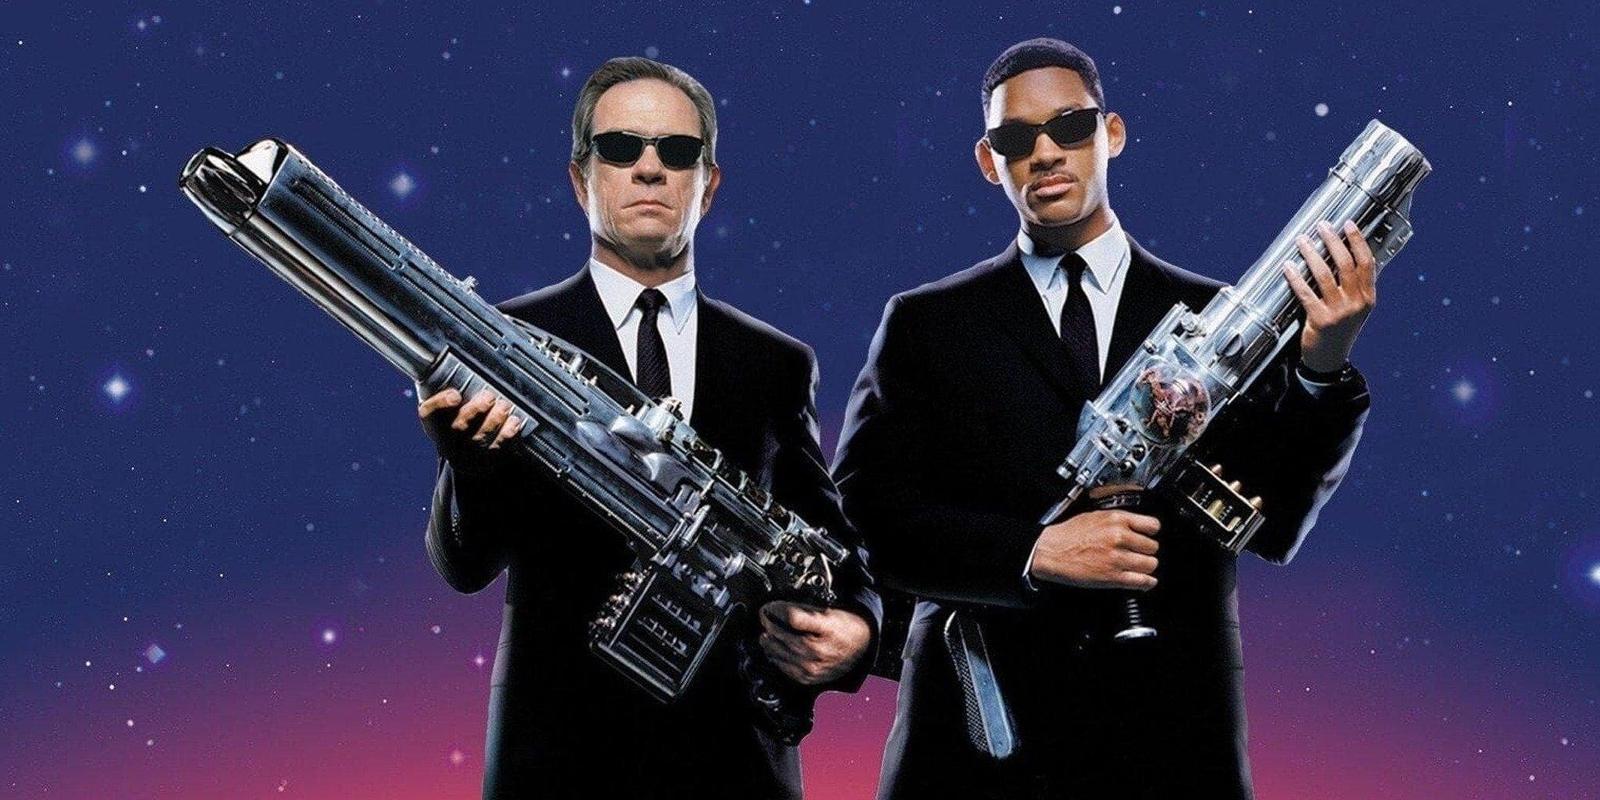 Name That Movie! Can You Fill in Blank & Name Movies Wi… Quiz Men in black